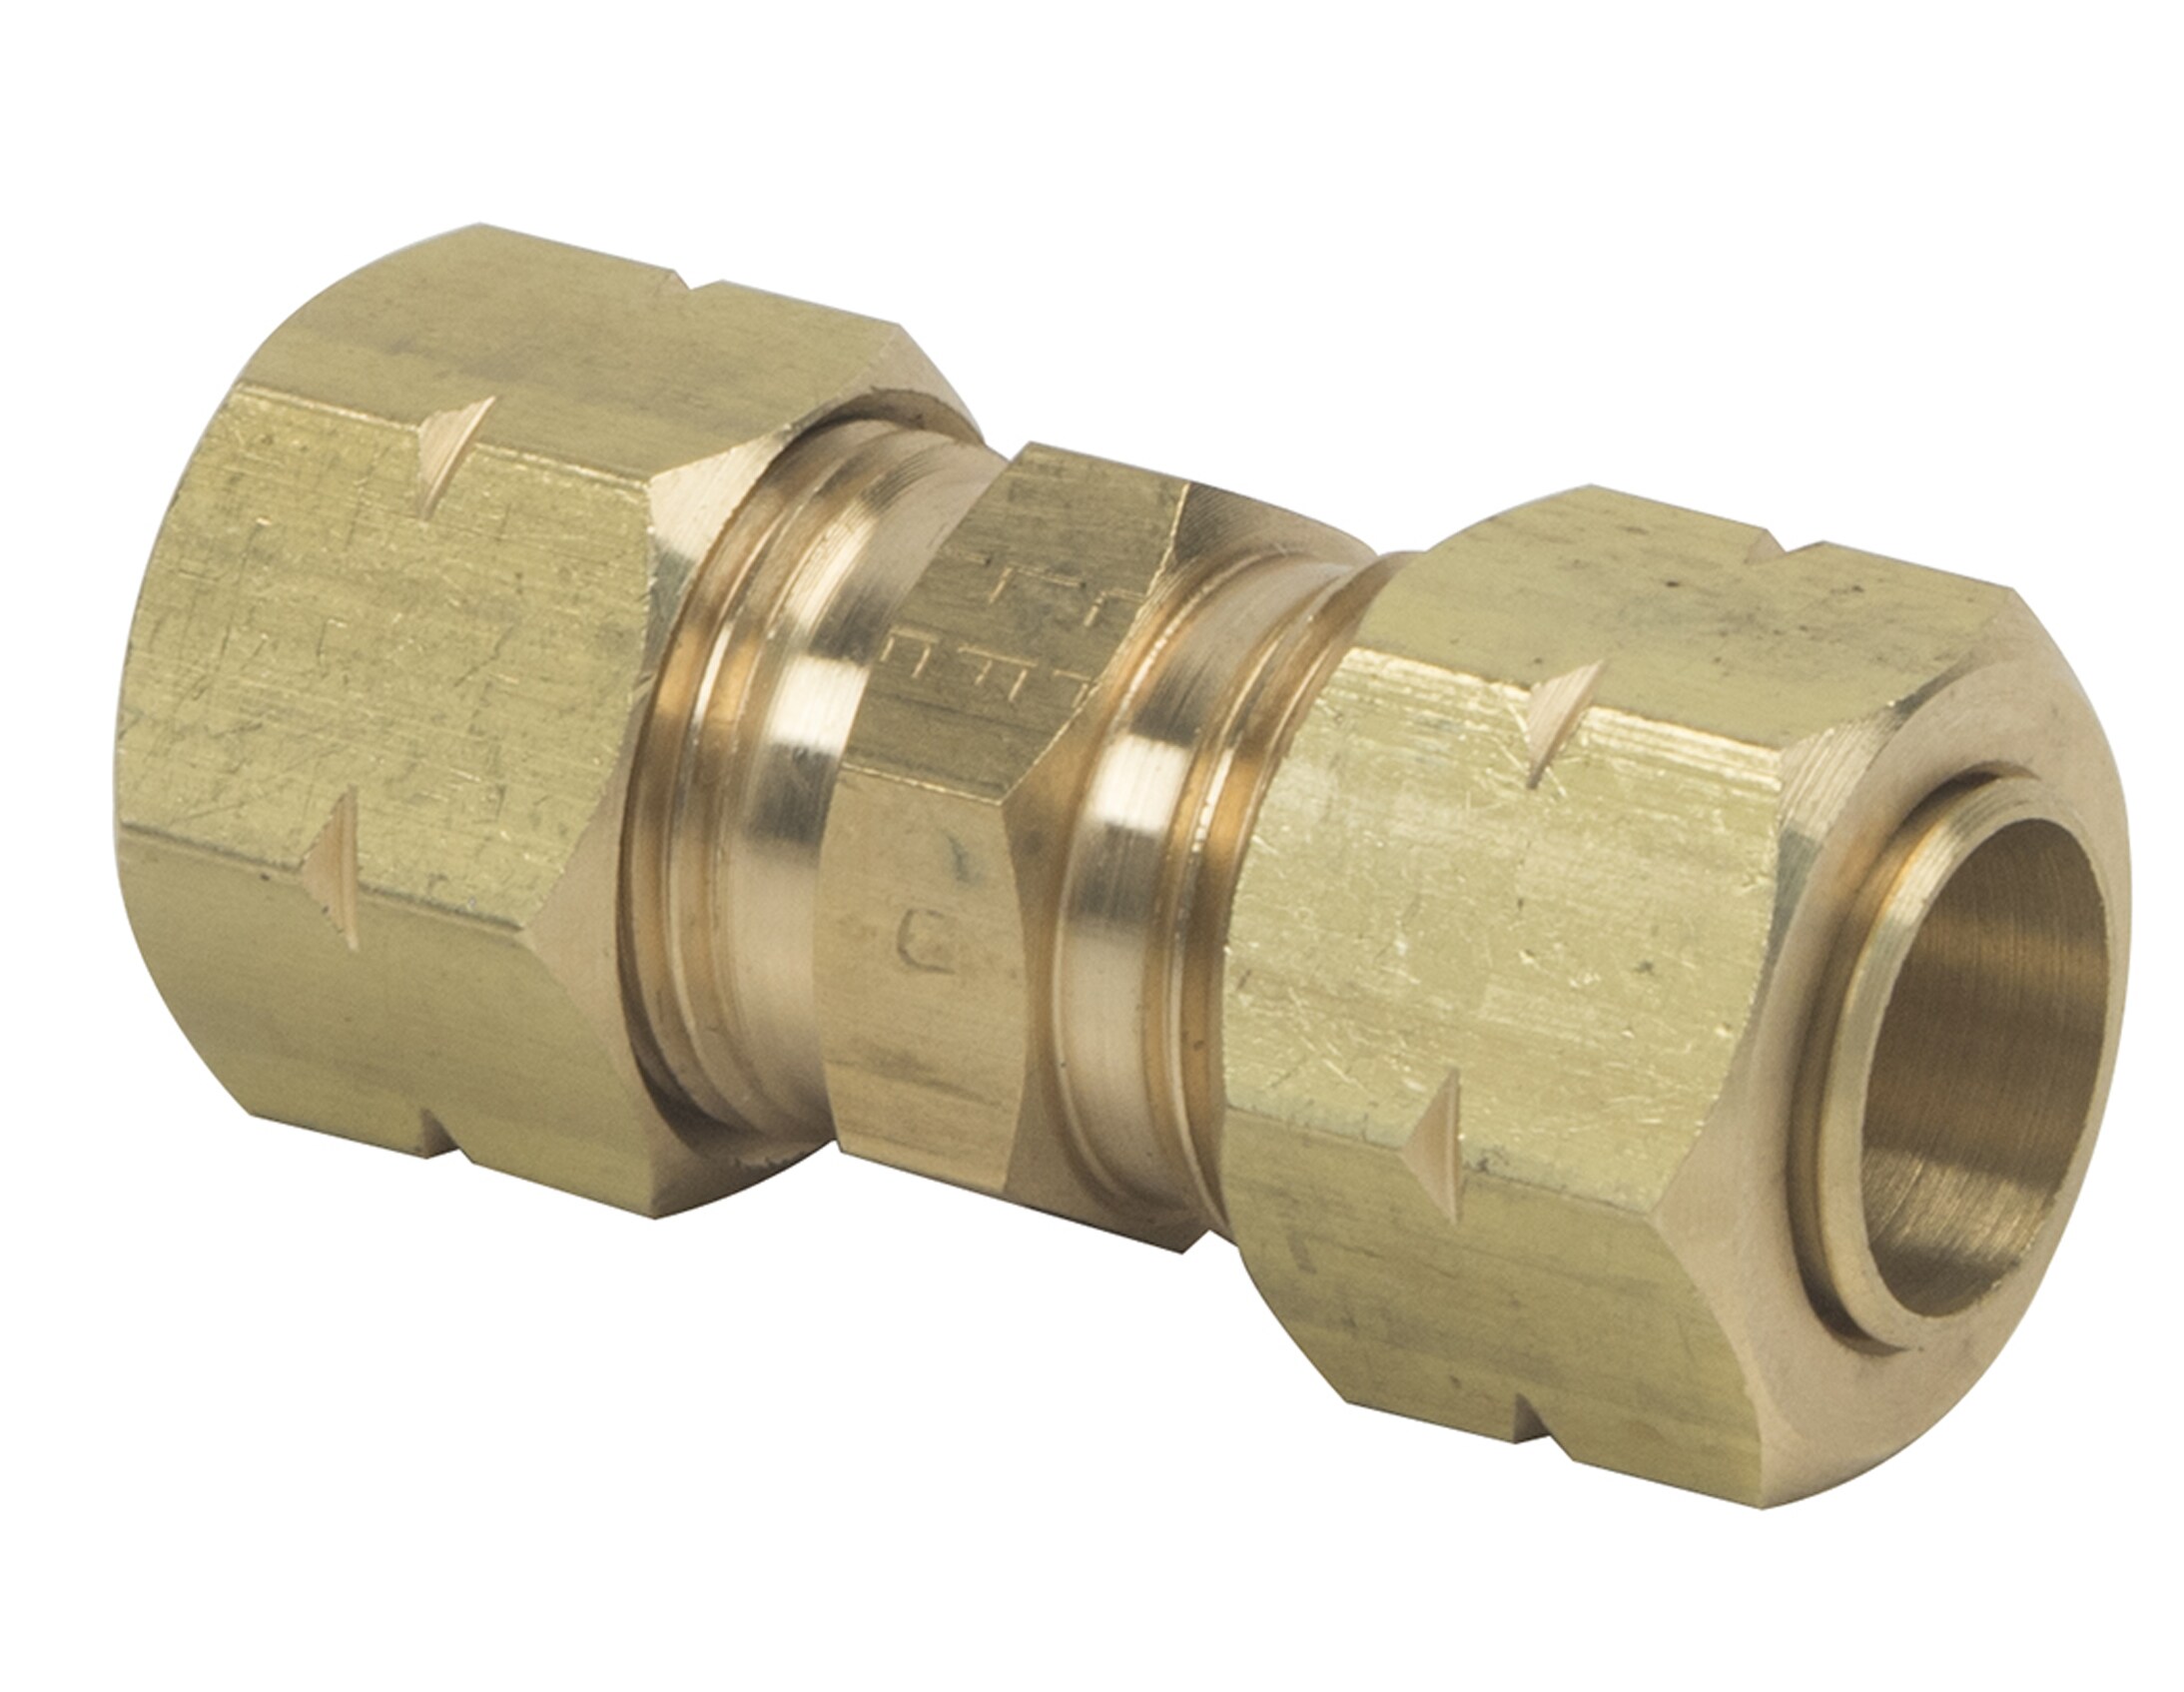 BrassCraft 3/8-in x 3/8-in Compression Coupling Fitting in the